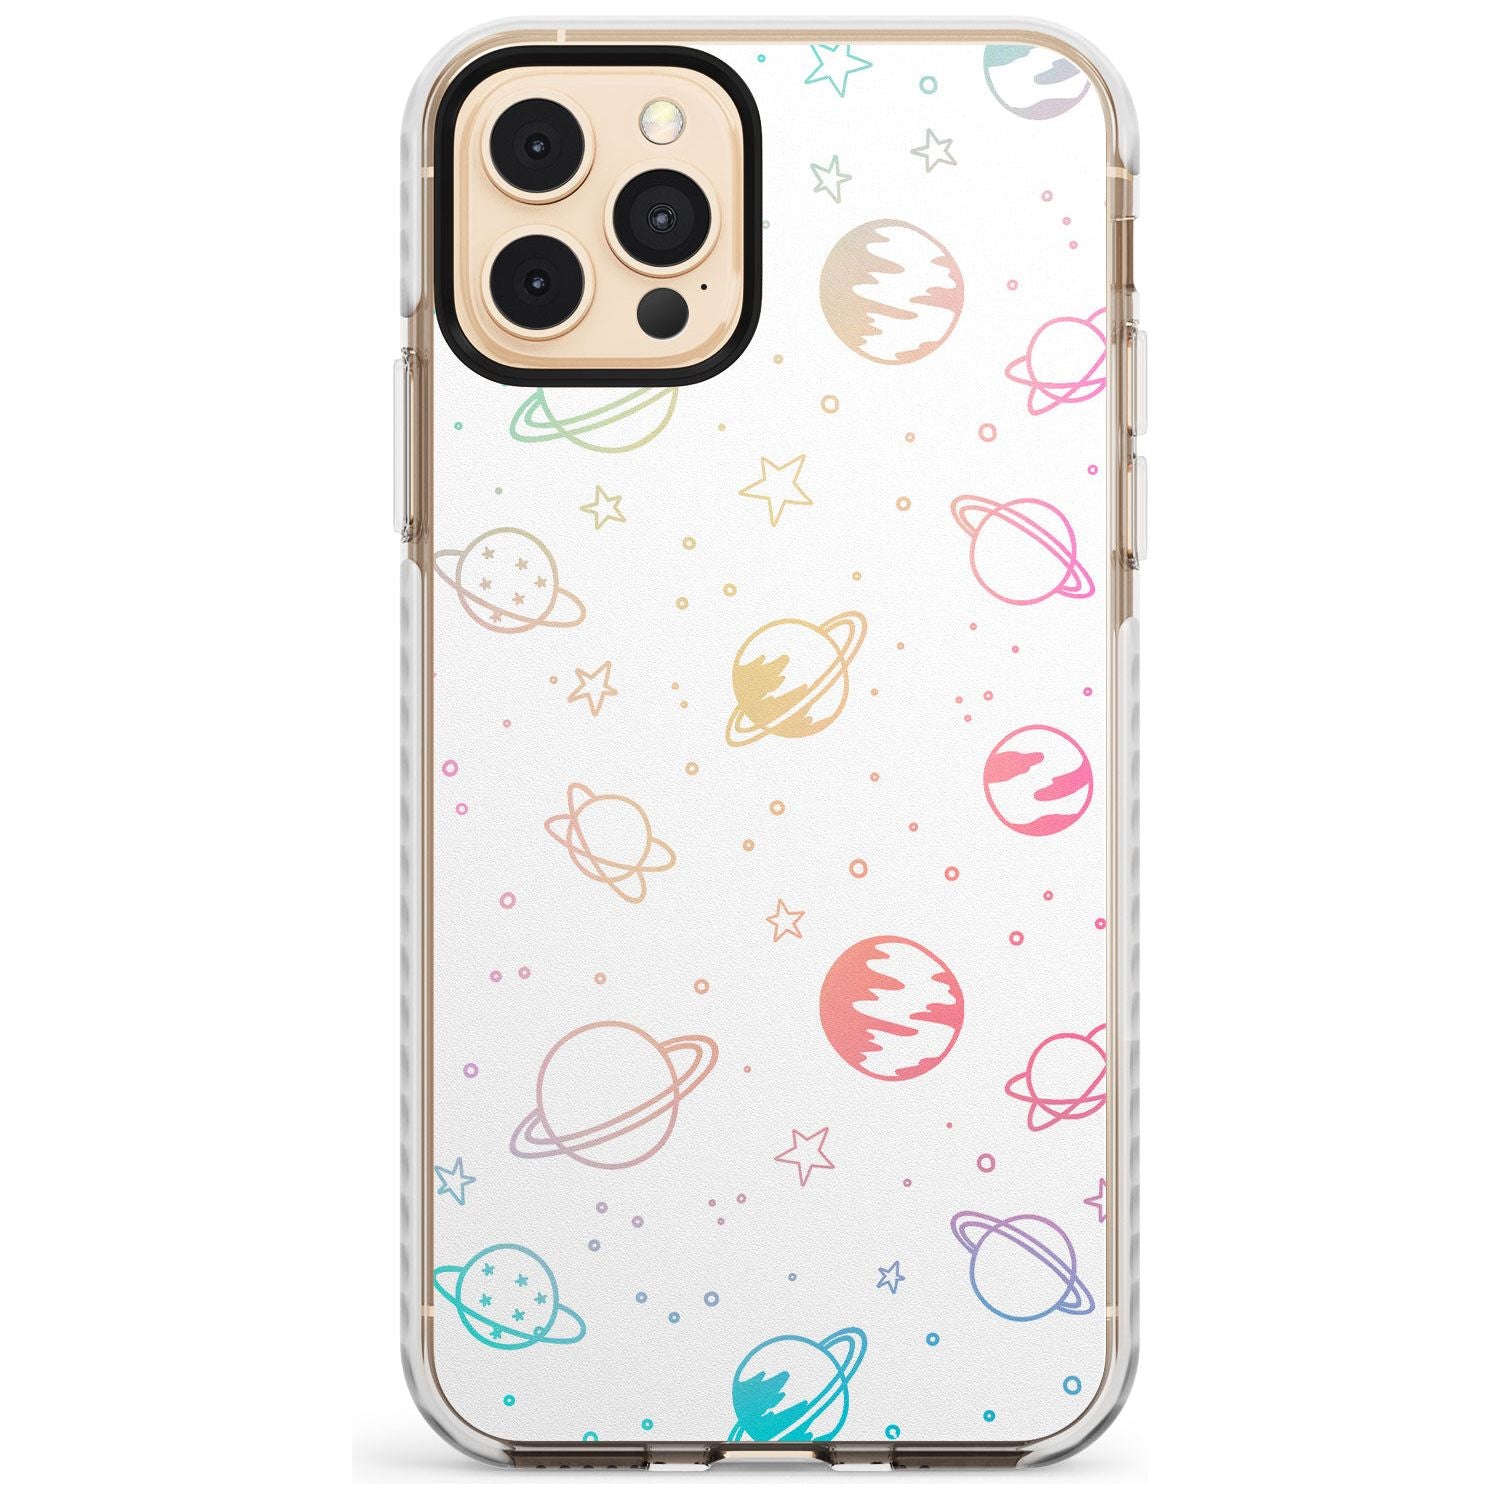 Outer Space Outlines: Pastels on White Slim TPU Phone Case for iPhone 11 Pro Max